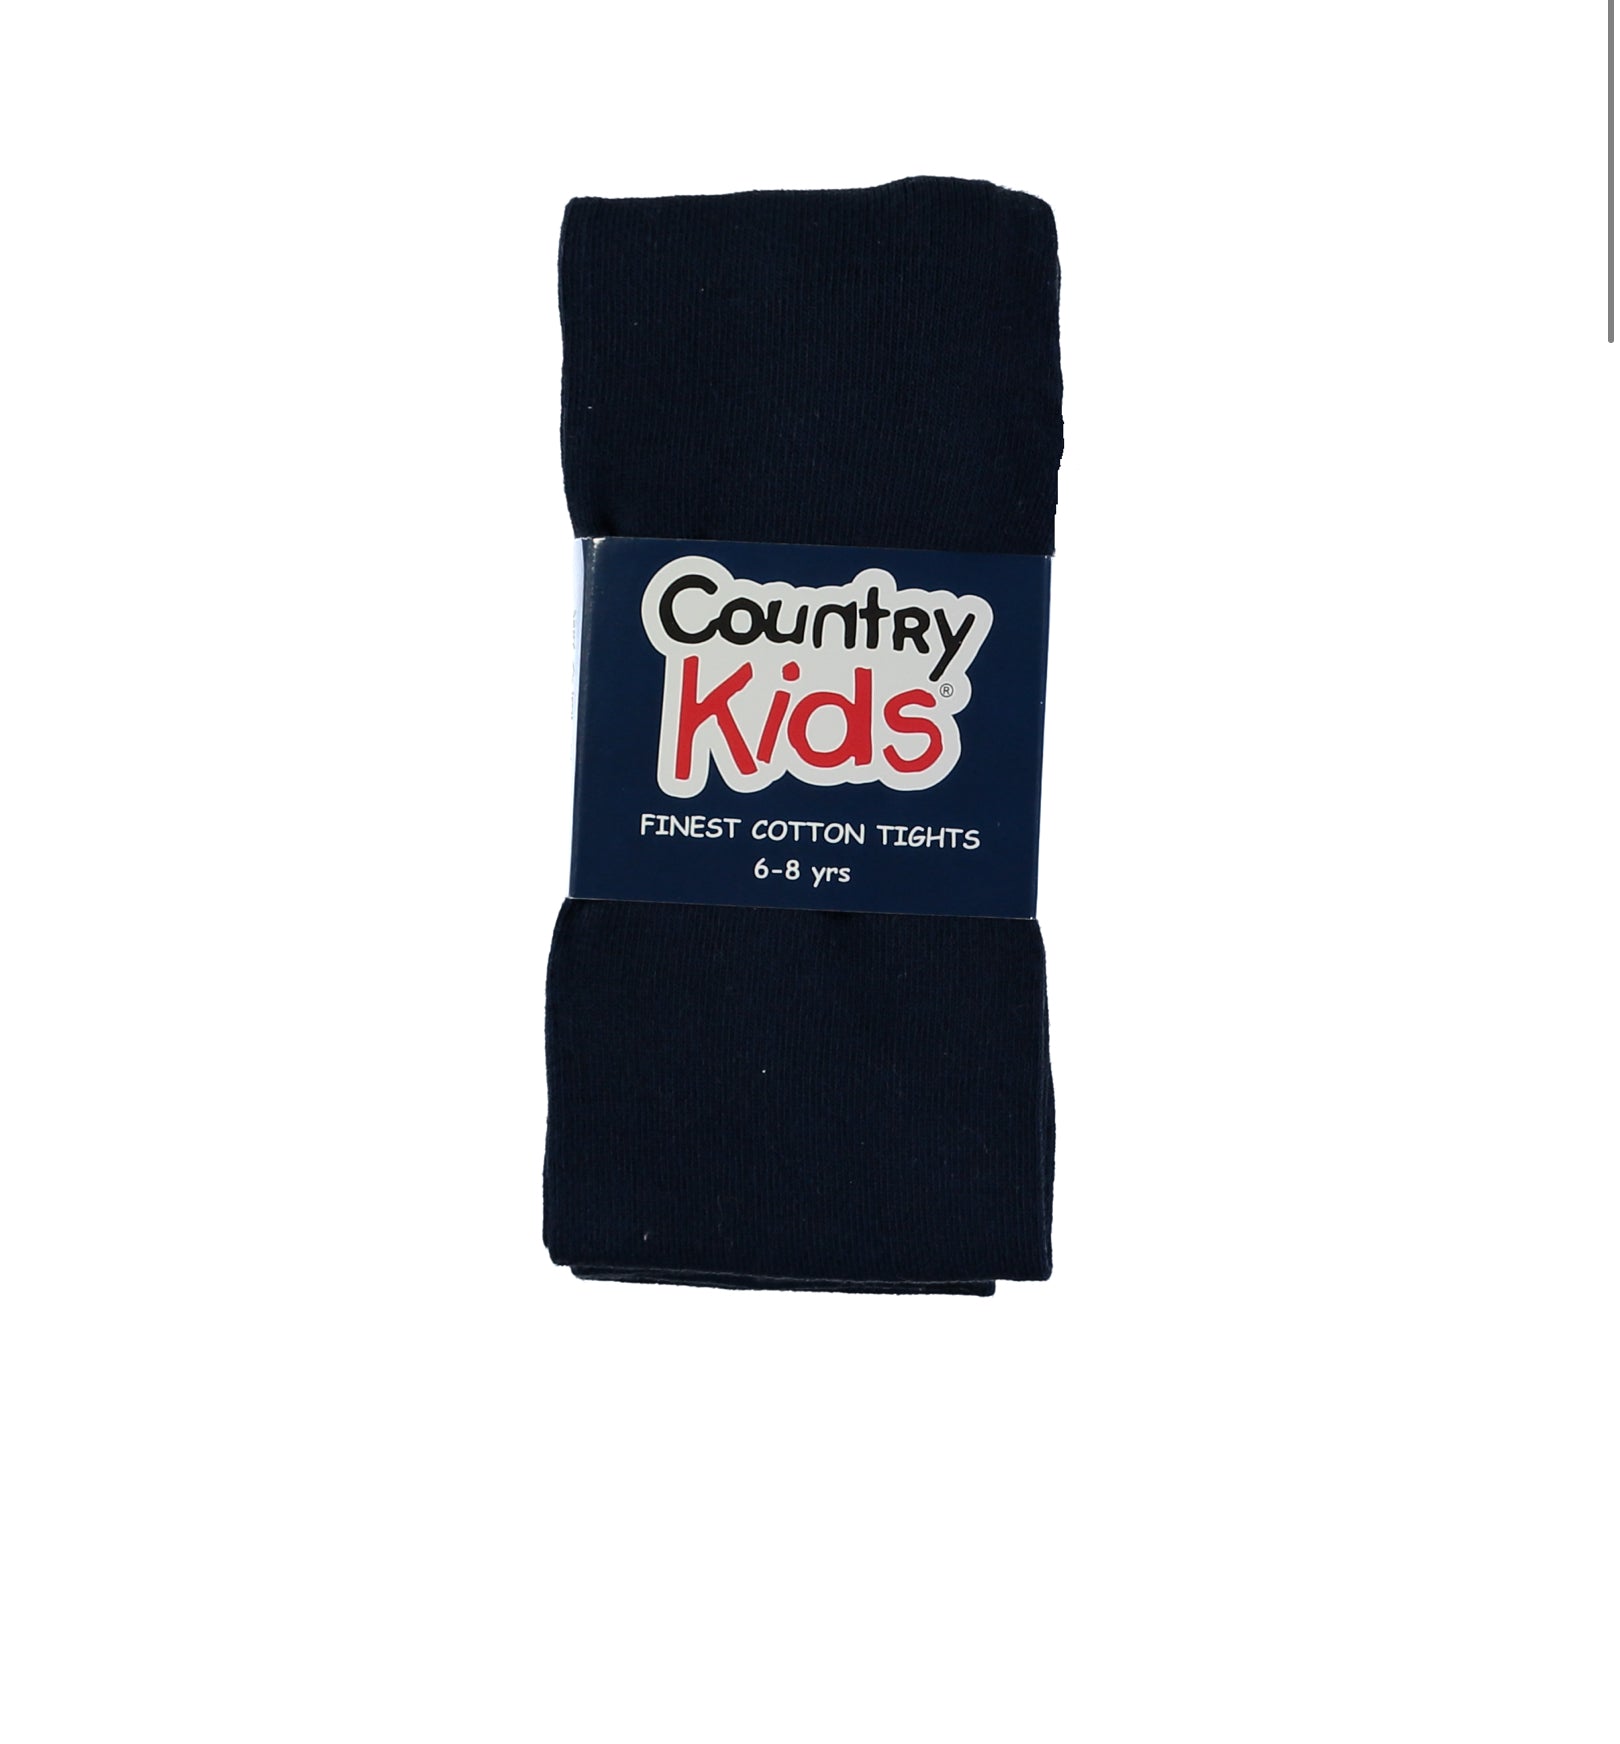 Navy Cotton Rich Tights from Country Kids